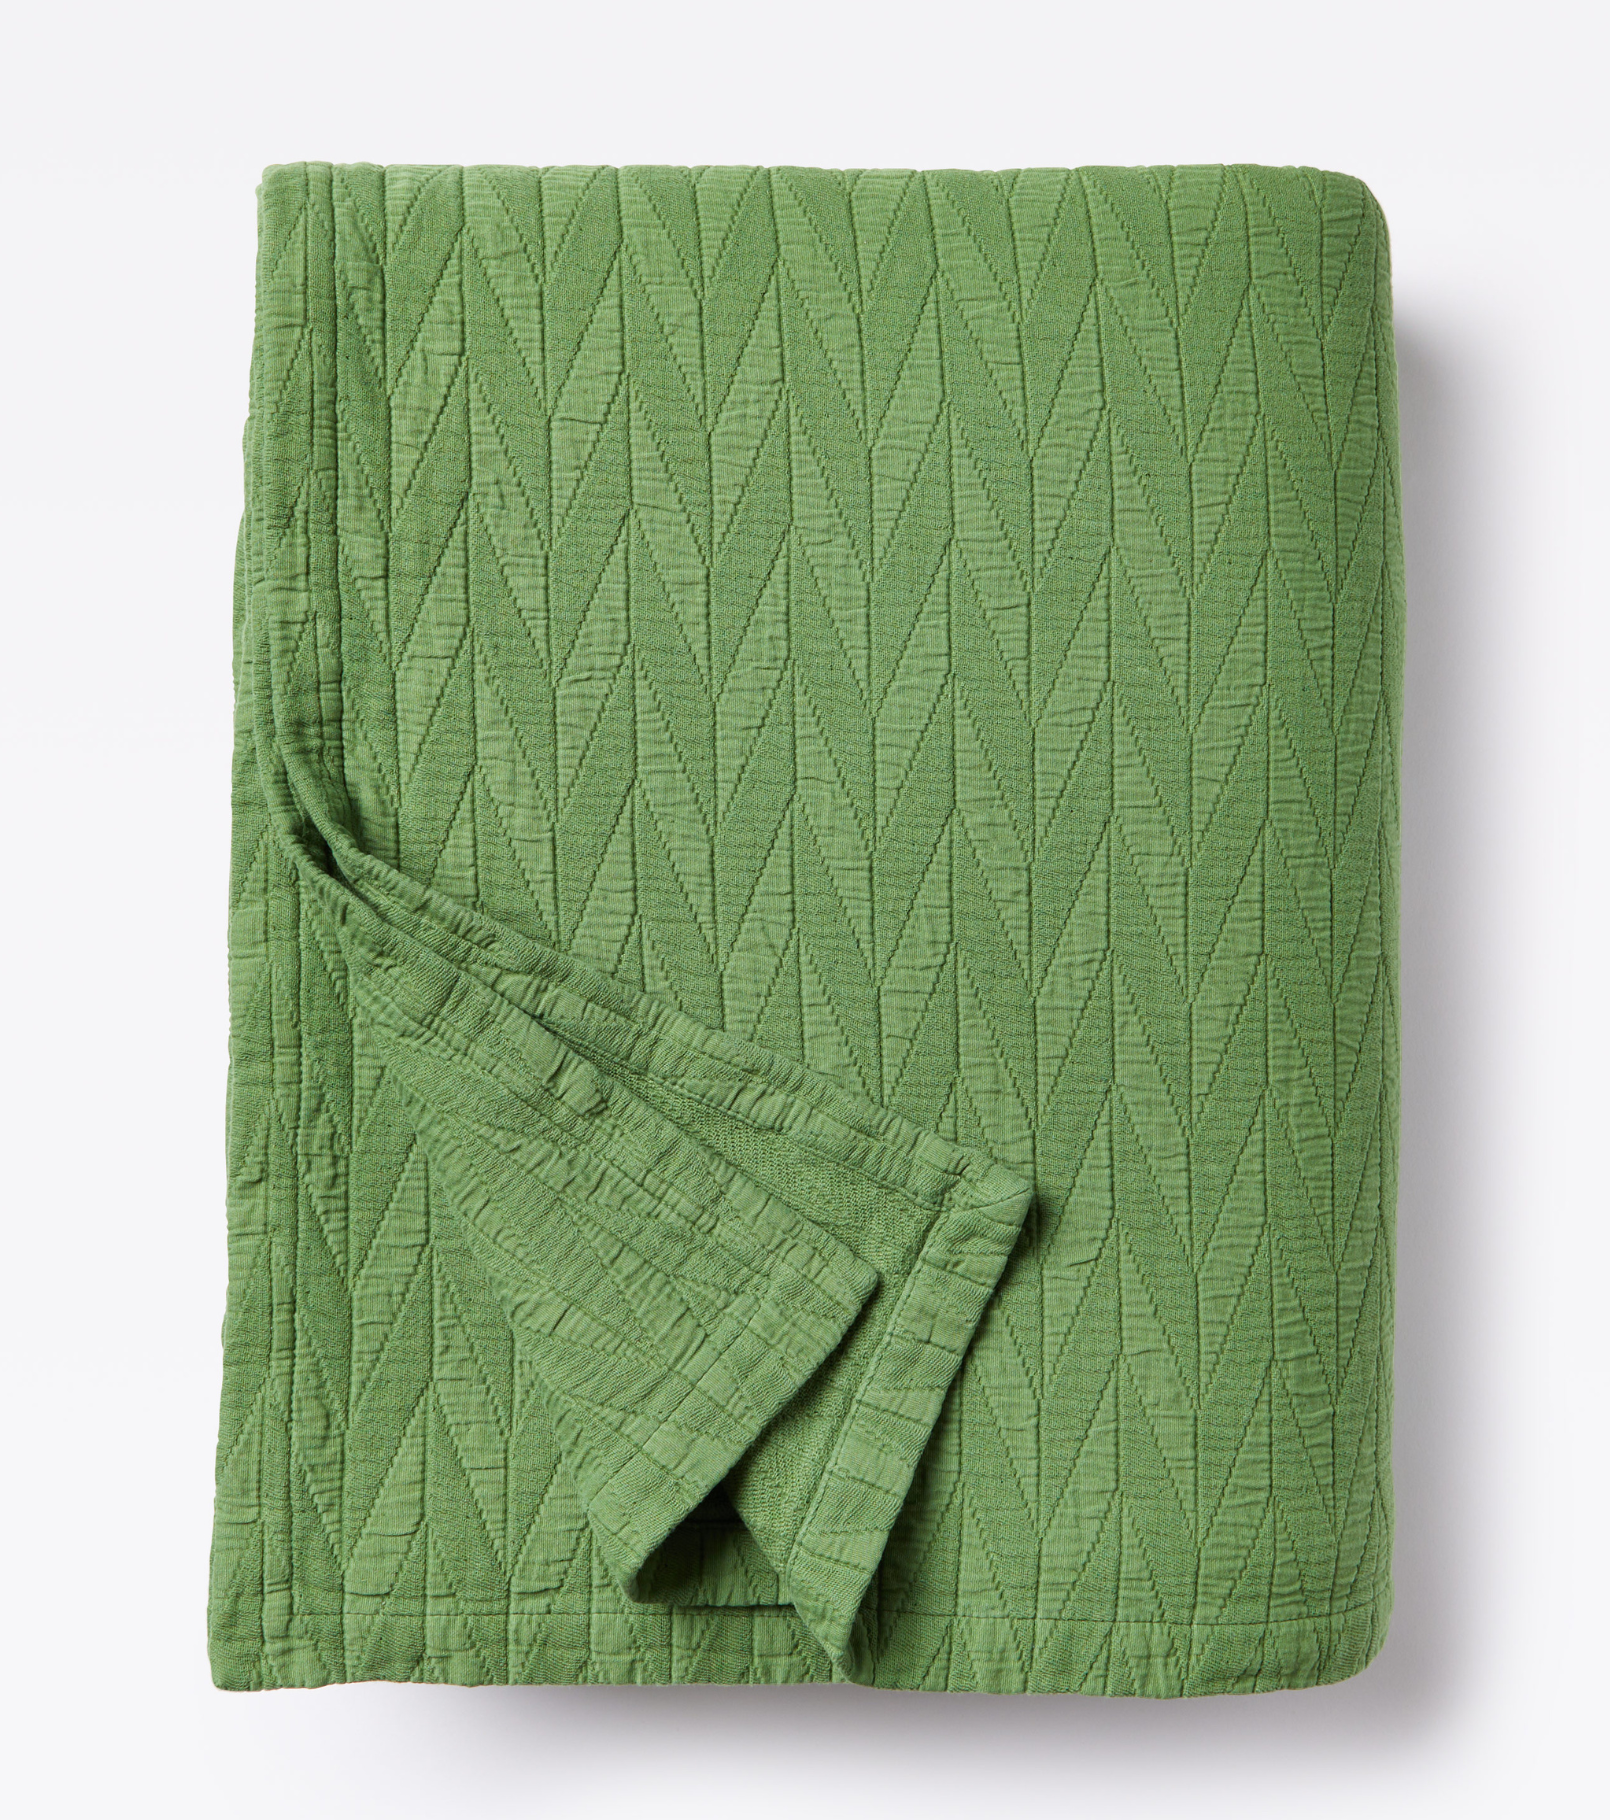 Averylily pure cotton matelassé coverlet. Each coverlet features a herringbone design that is unique to Averylily. Shown here in Palm Green.